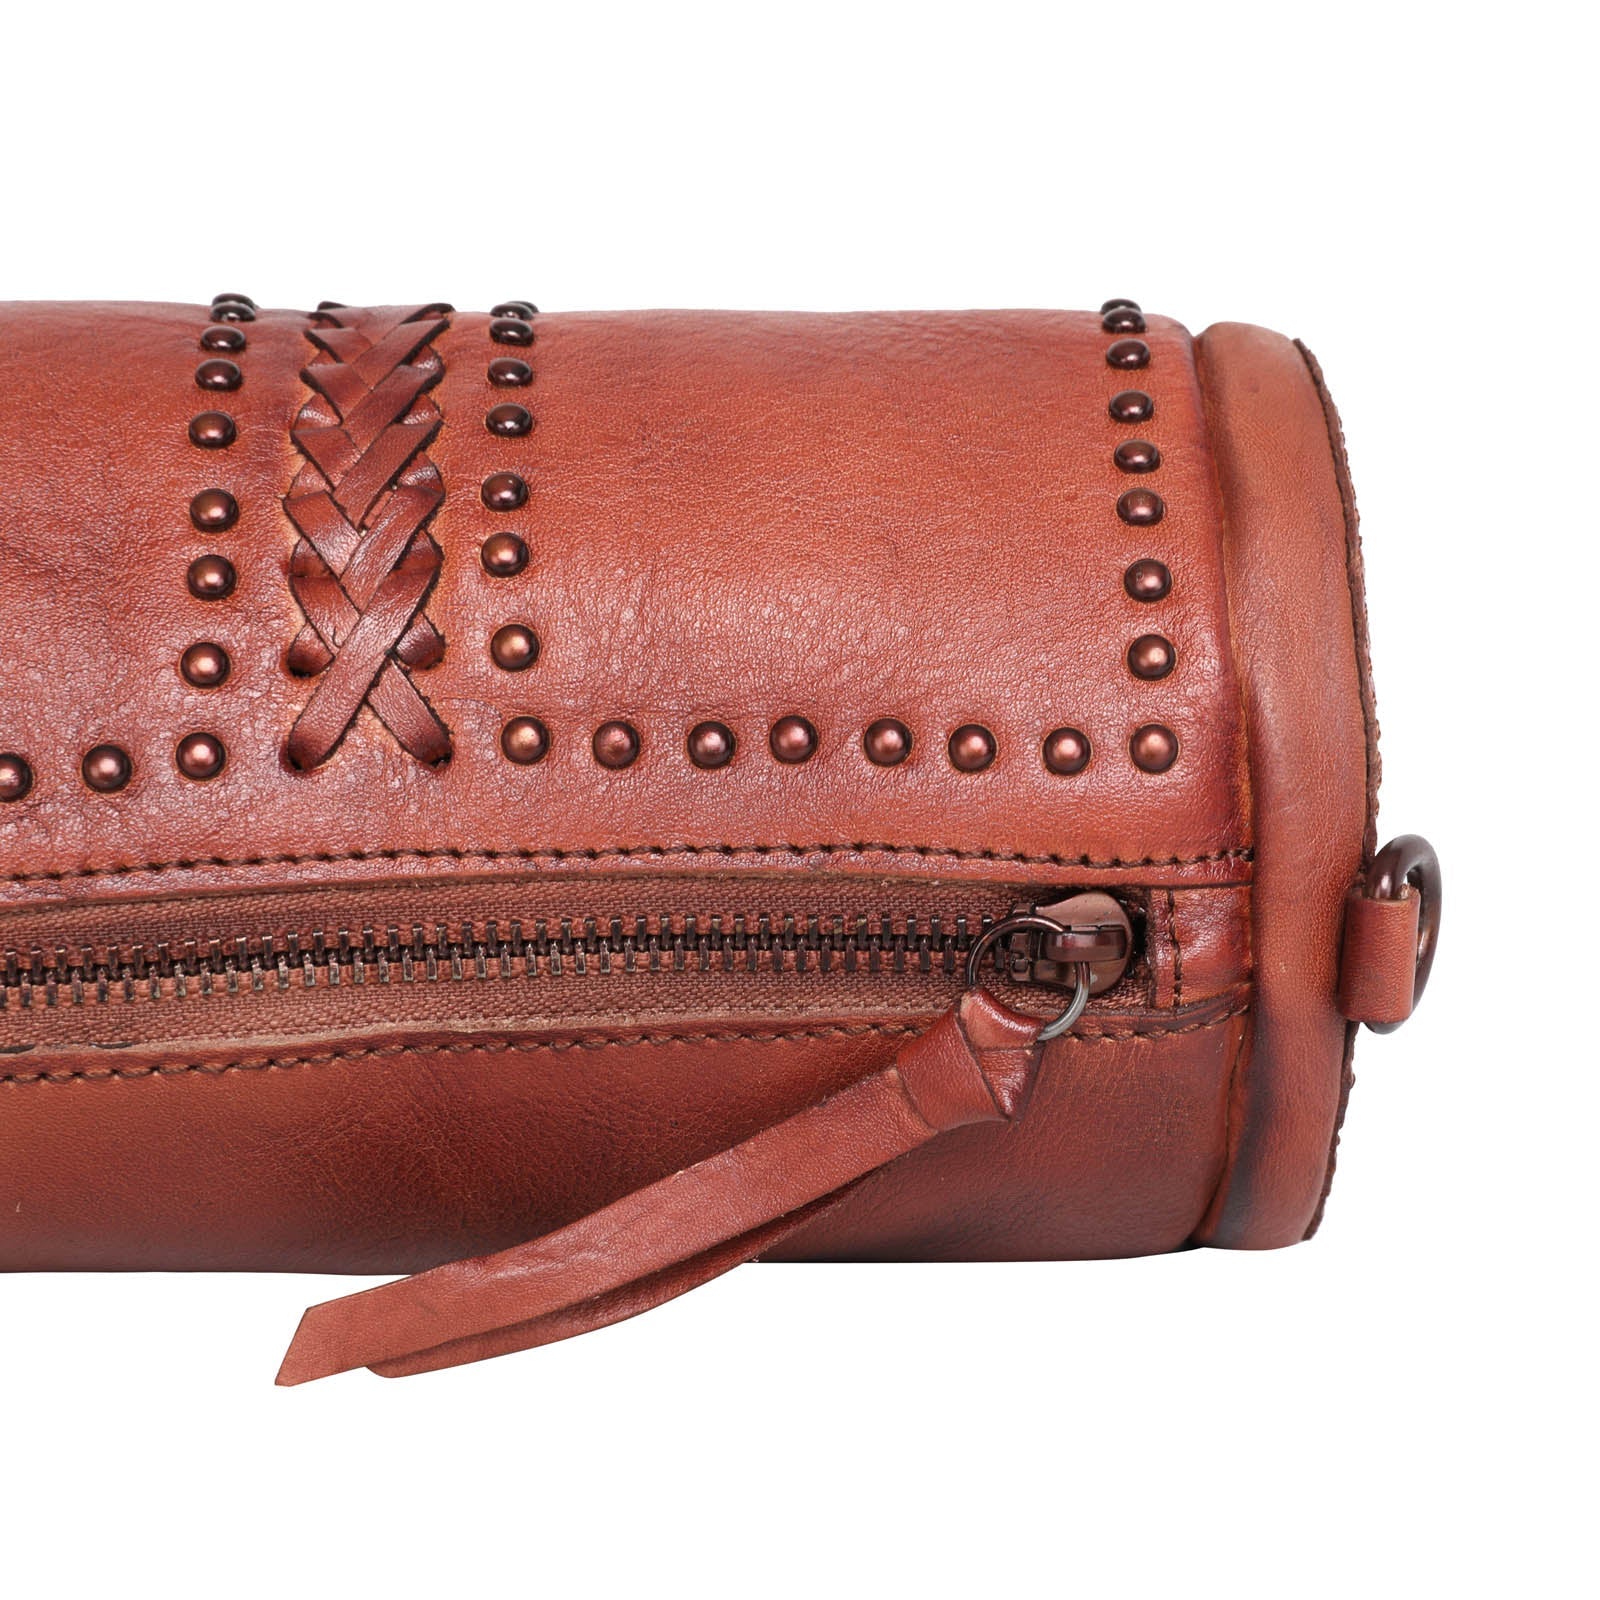 Montana West Genuine Leather Studs Collection Mini Barrel Bag - Cowgirl Wear